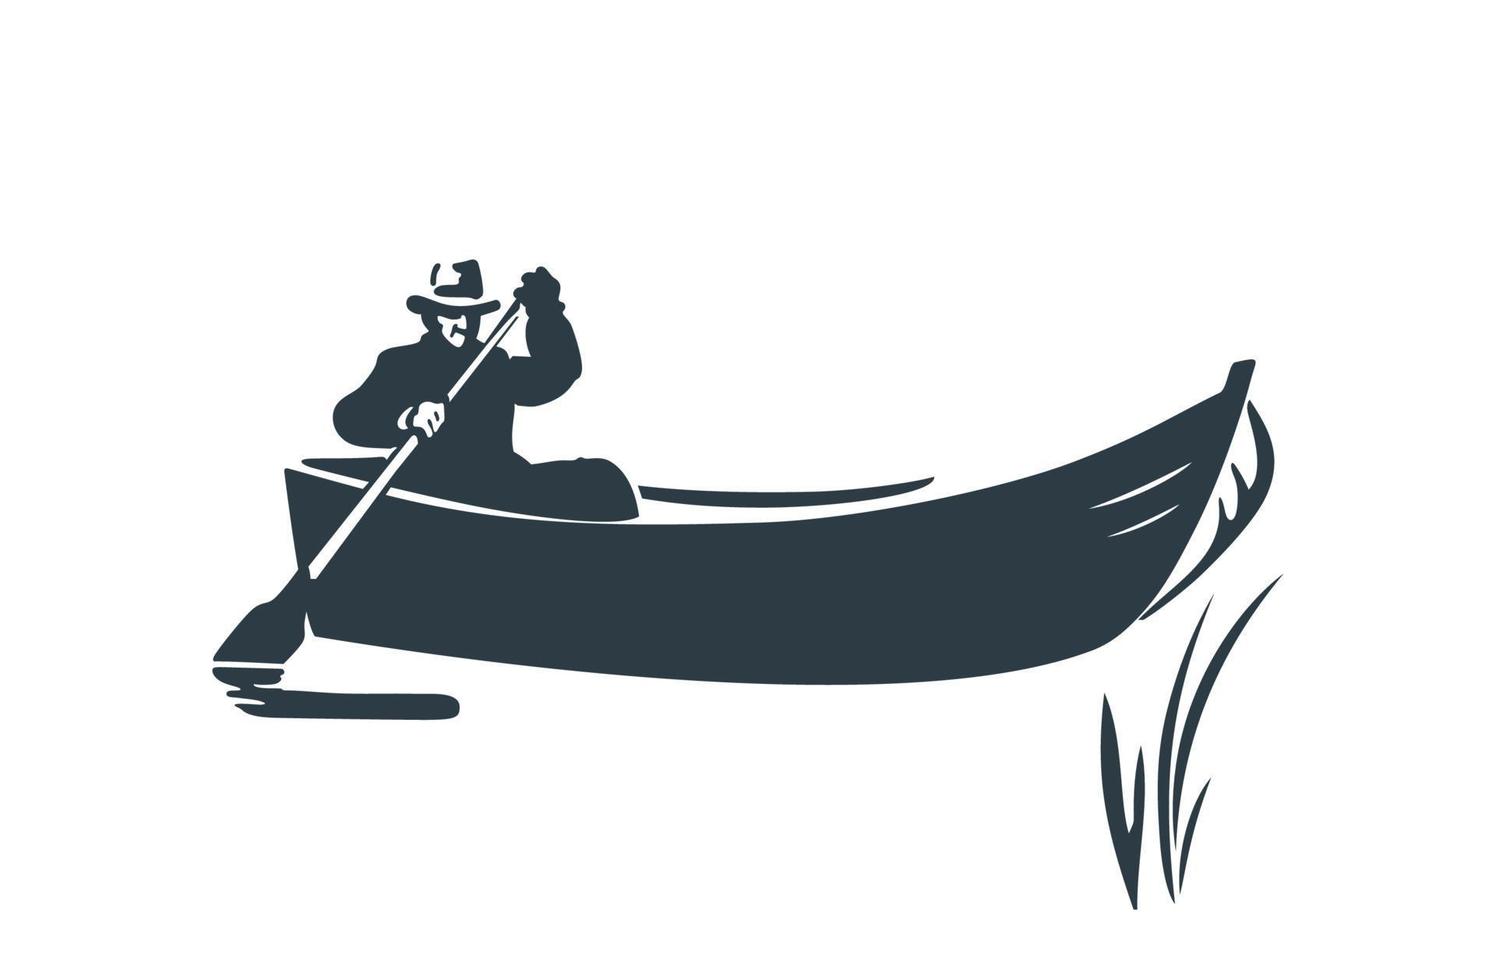 Silhouette of a man rowing boat on lake. Professional adult fisherman. Isolated on a white background. Vector illustration.